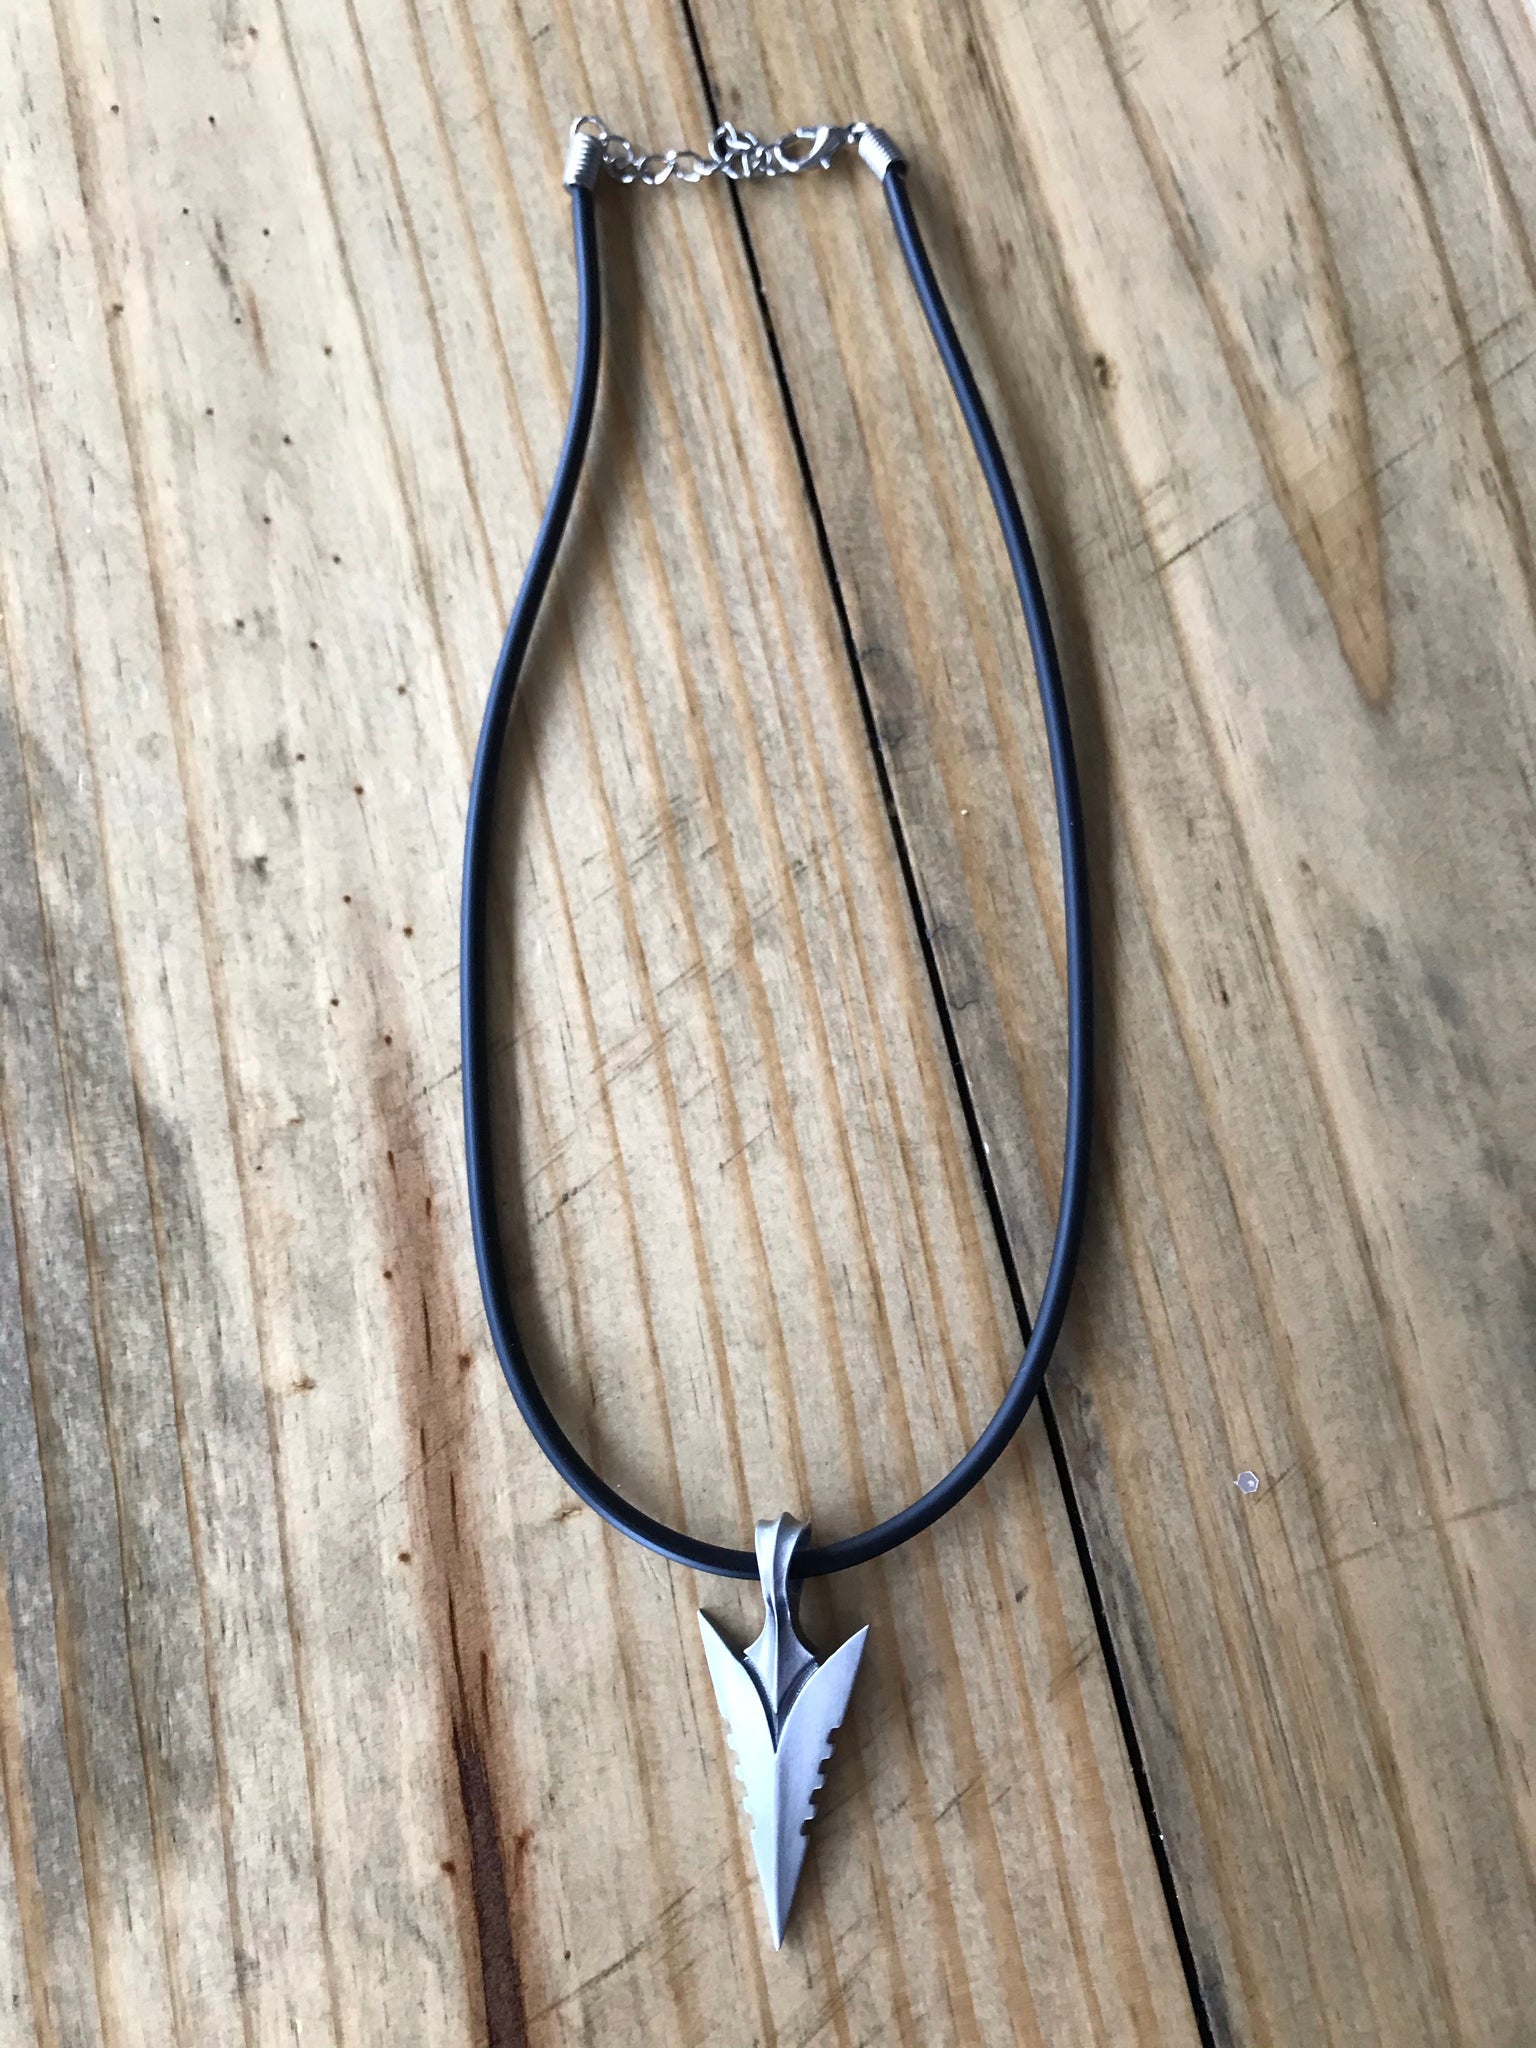 Herat necklace, black cord cocker necklace with a silver heart pendant. choker  necklace, gift for girlfriend, love jewelry, anniversary gift – Shani & Adi  Jewelry